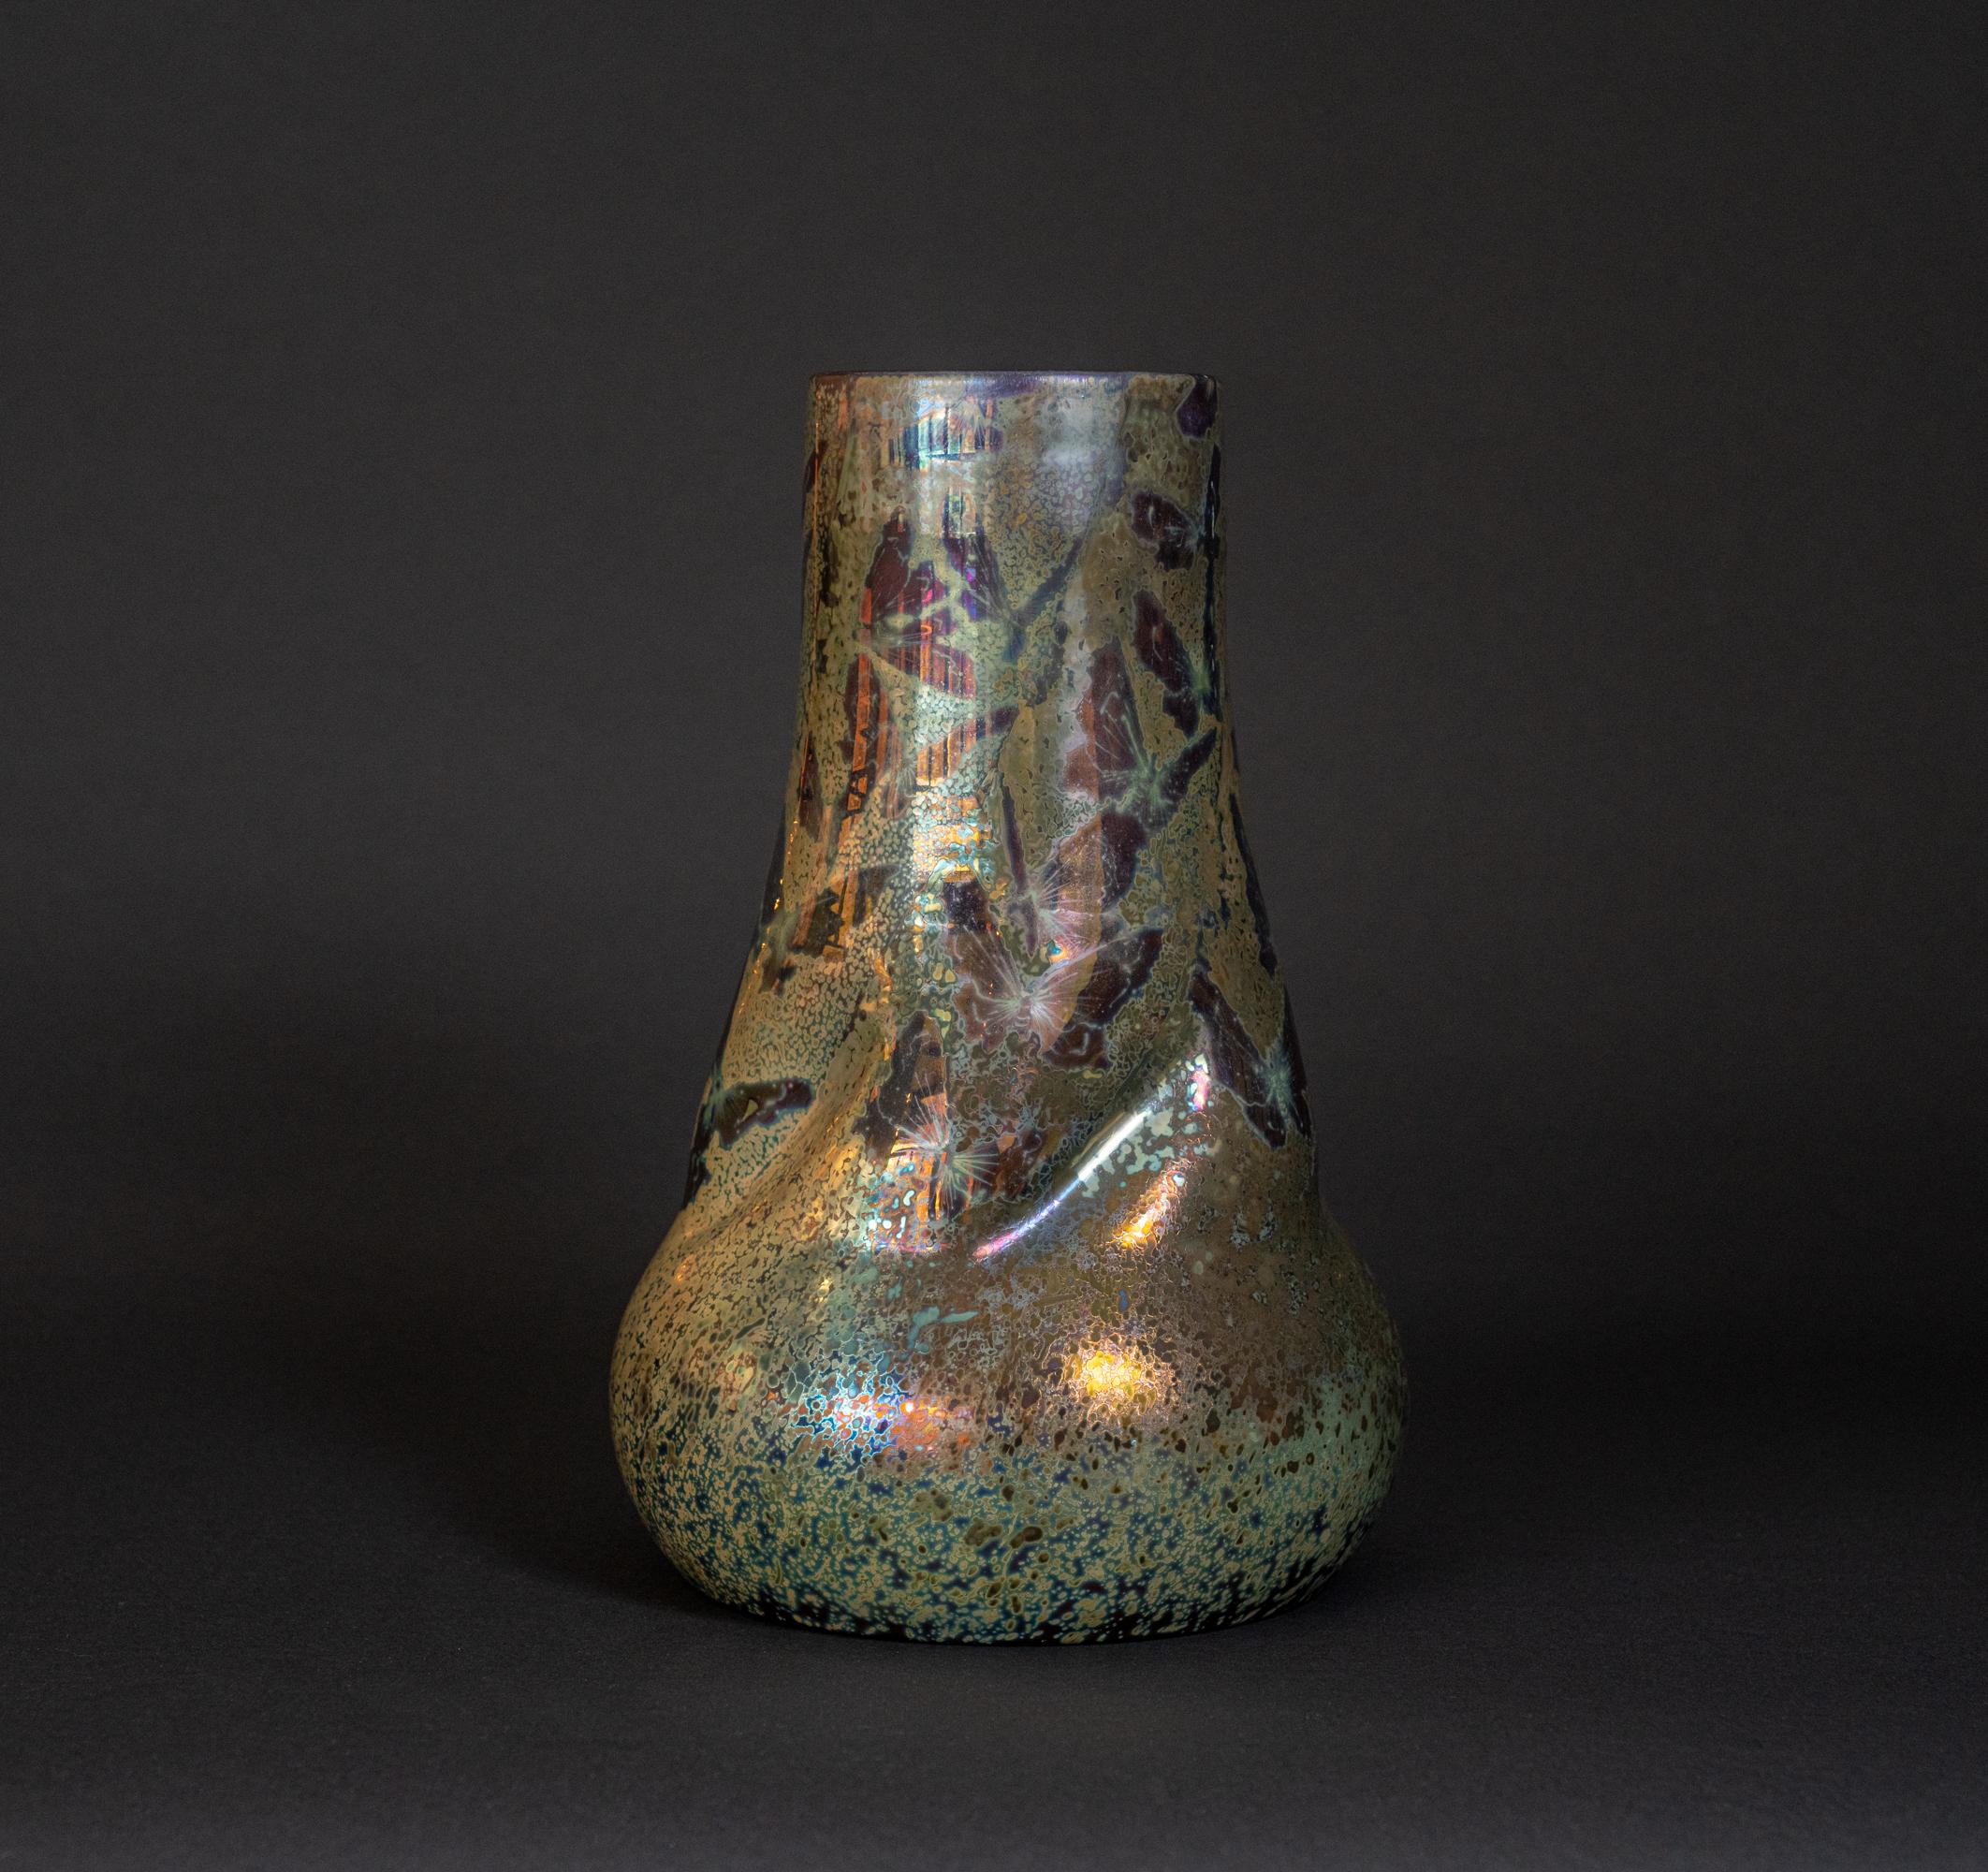 Signed Lucien Levy-Dhurmer. 

An encounter with Massier’s luster-glazed ceramics is an embarkation on an acid-colored trip, the sort of exploration which inspires deep reflection and requires transparency. Clement Massier, an accomplished ceramist